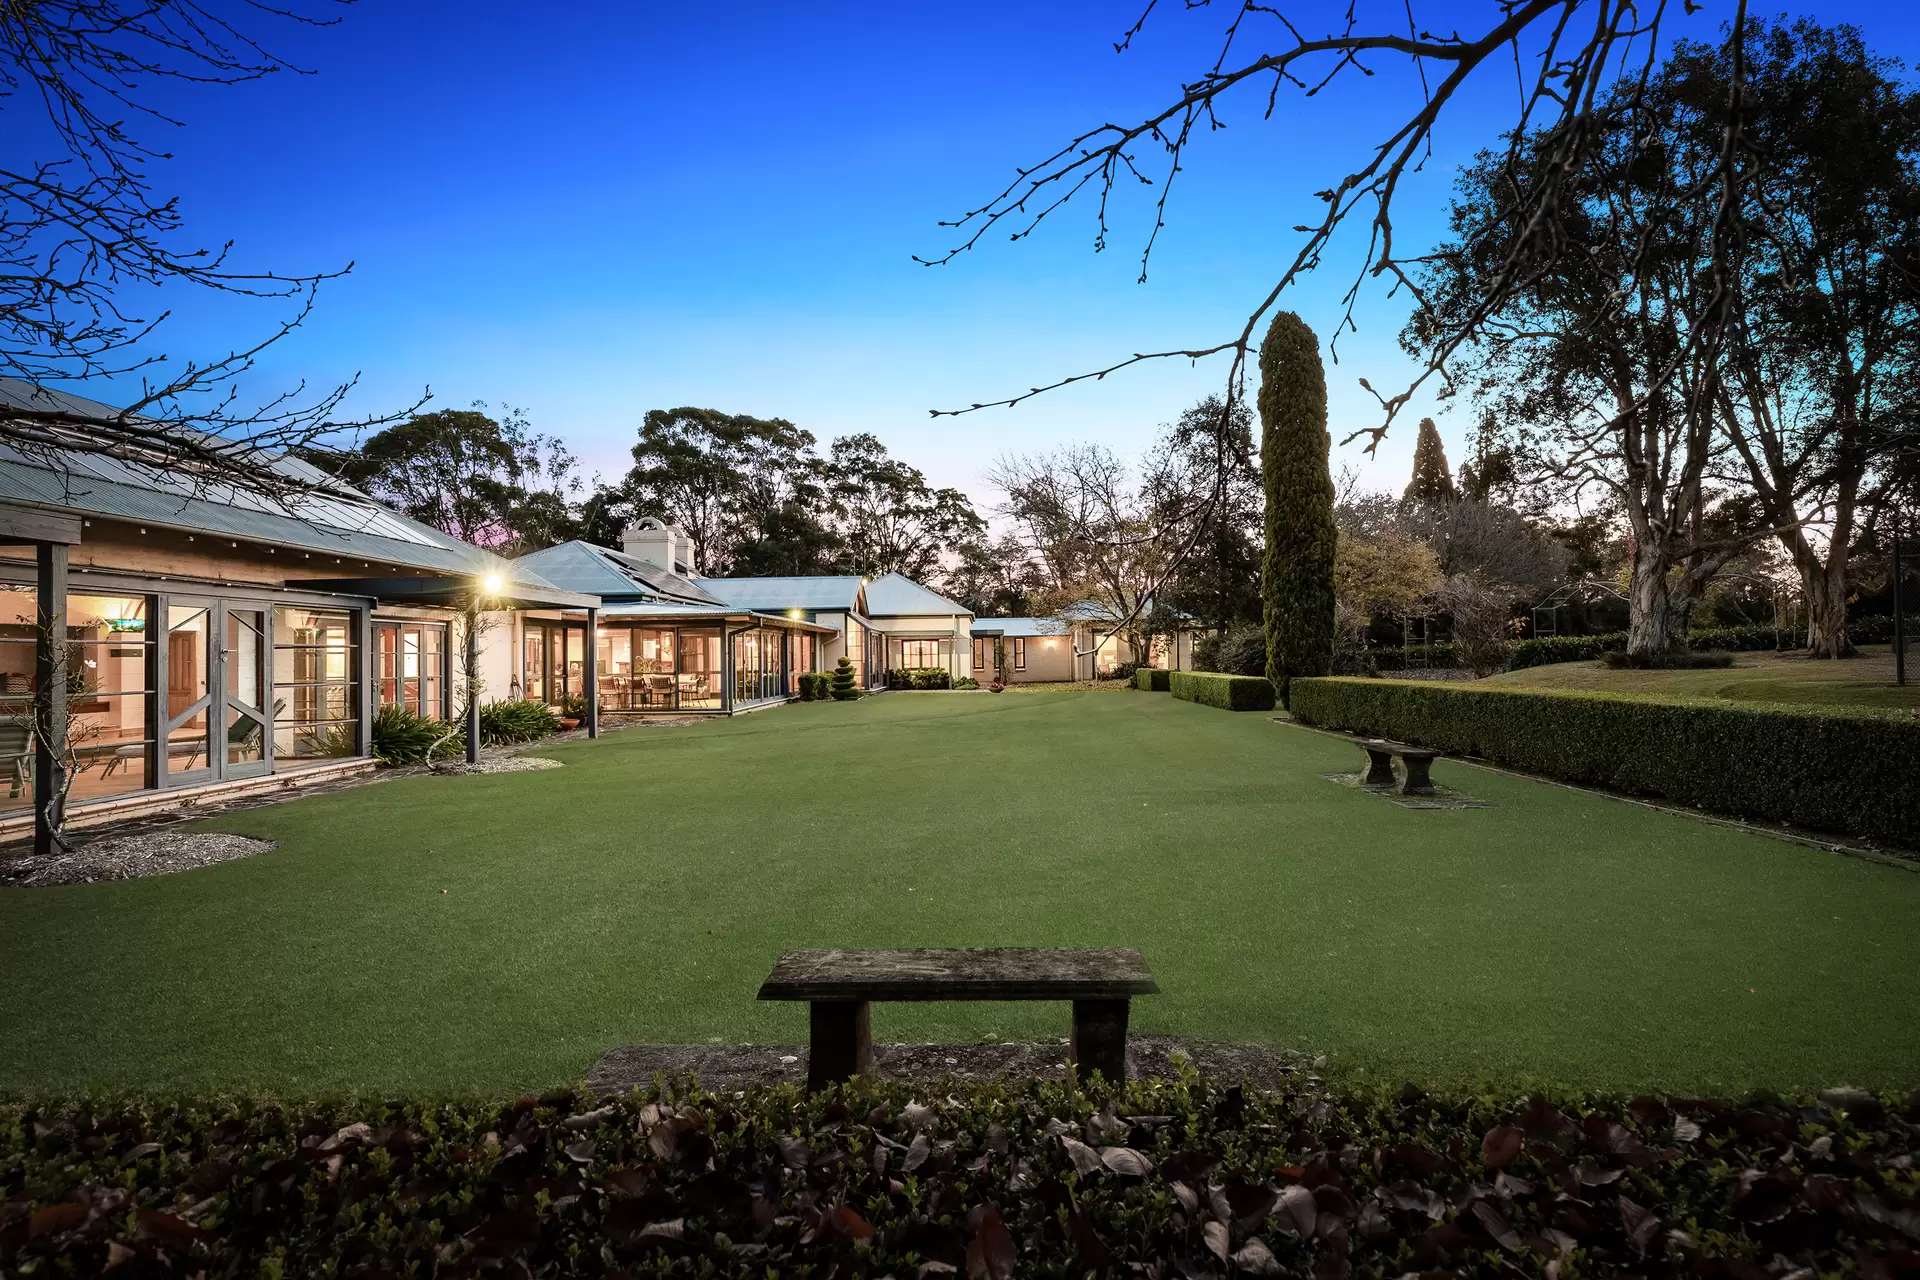 Photo #3: 5 Ascot Road, Kenthurst - For Sale by Louis Carr Real Estate